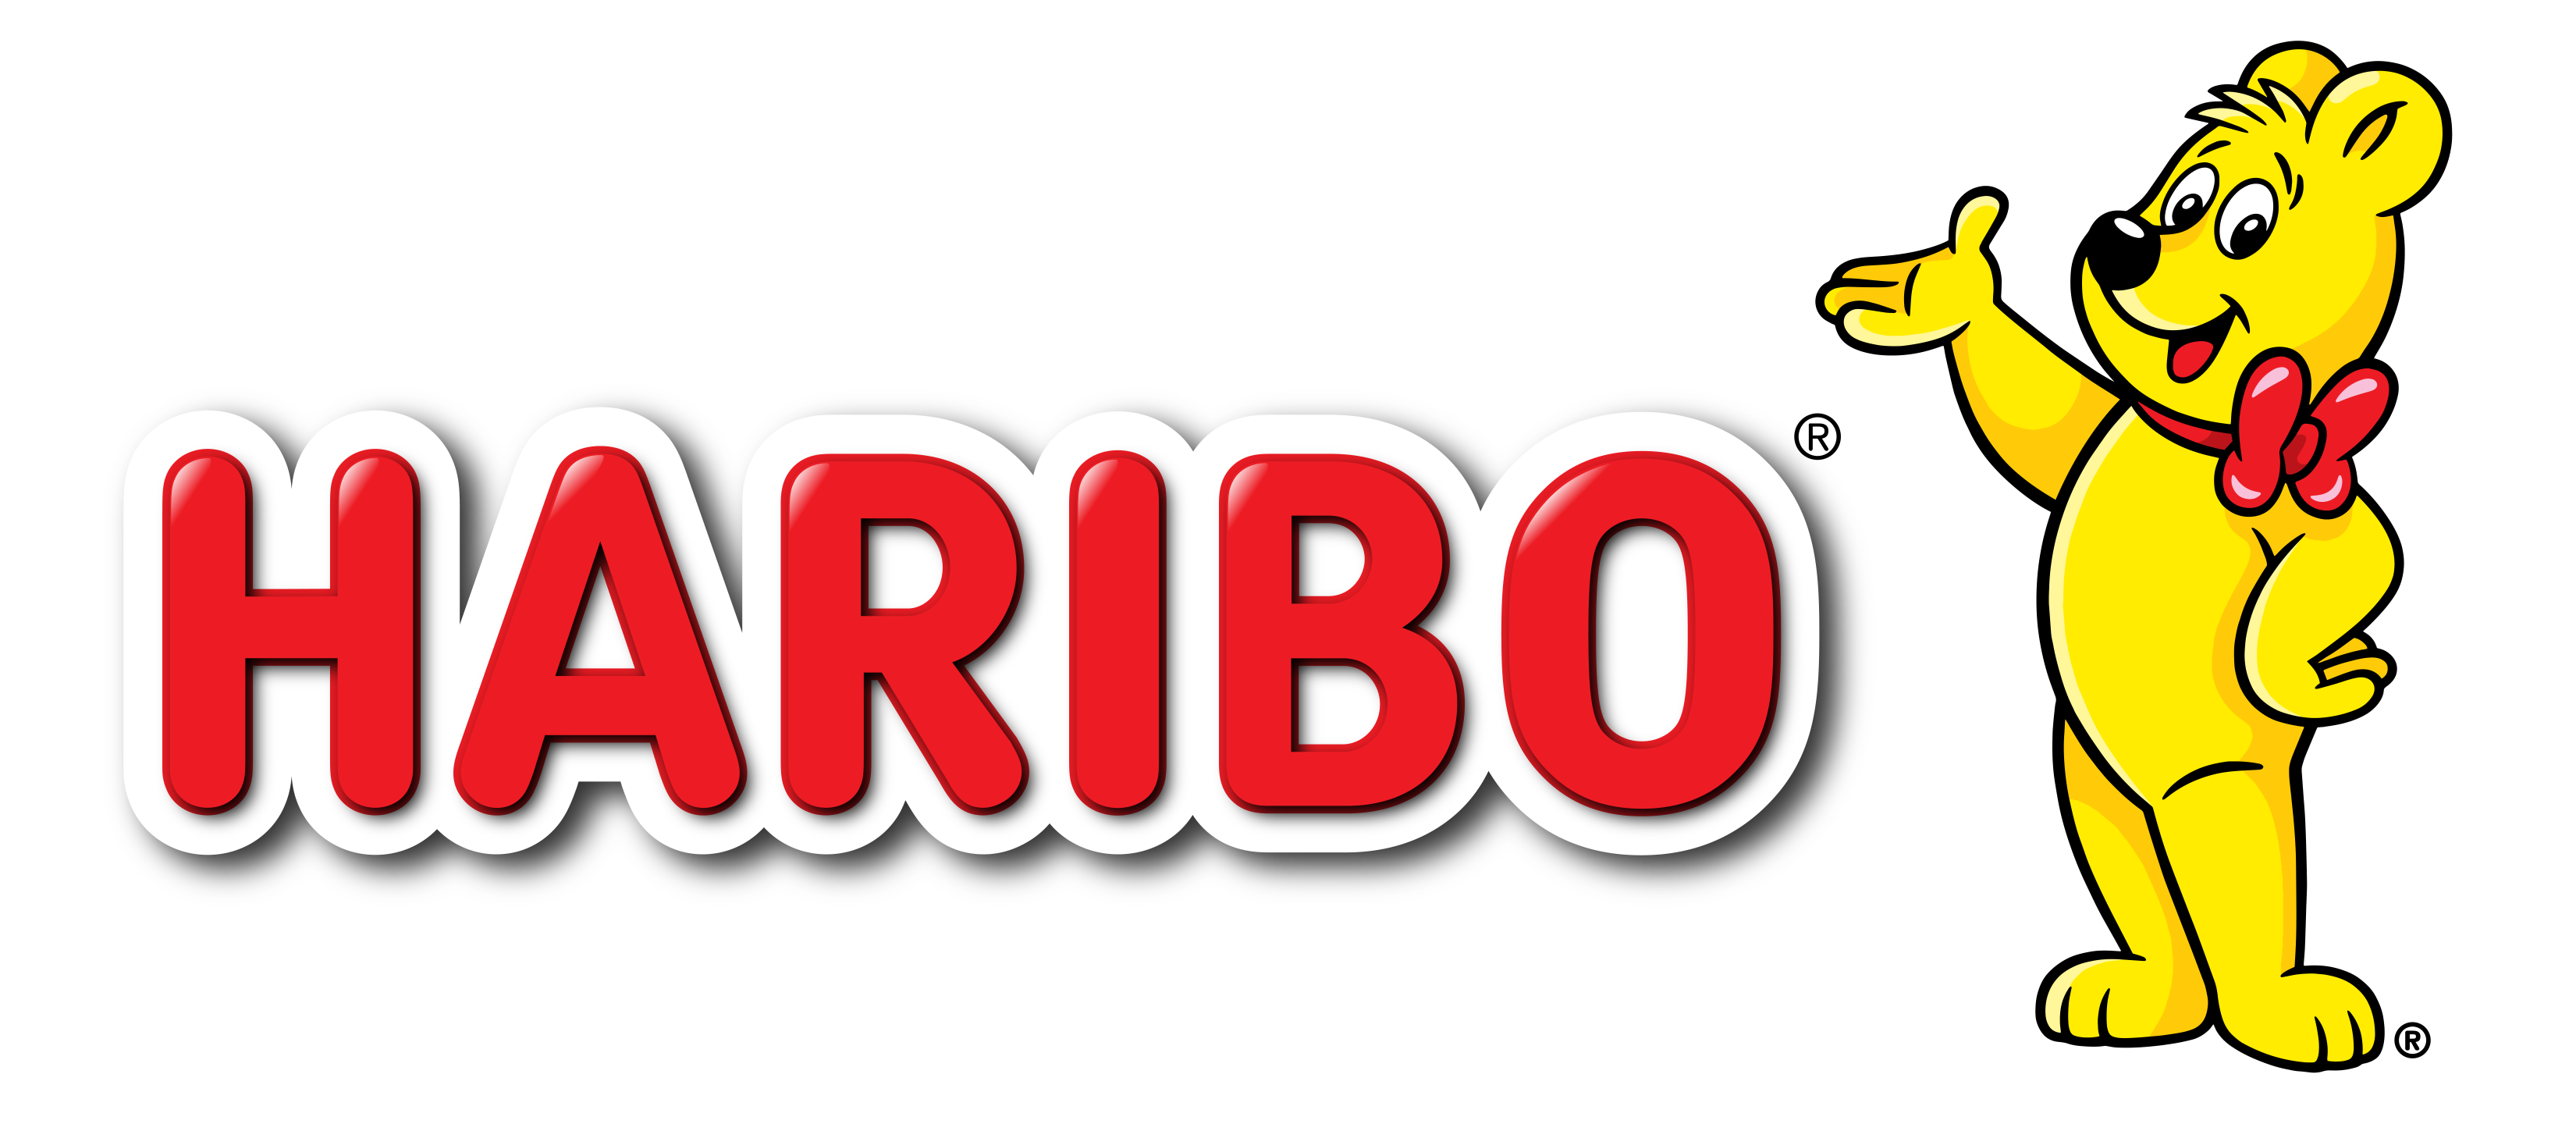 Image of haribo in red with a cute yellow bear with a red bow